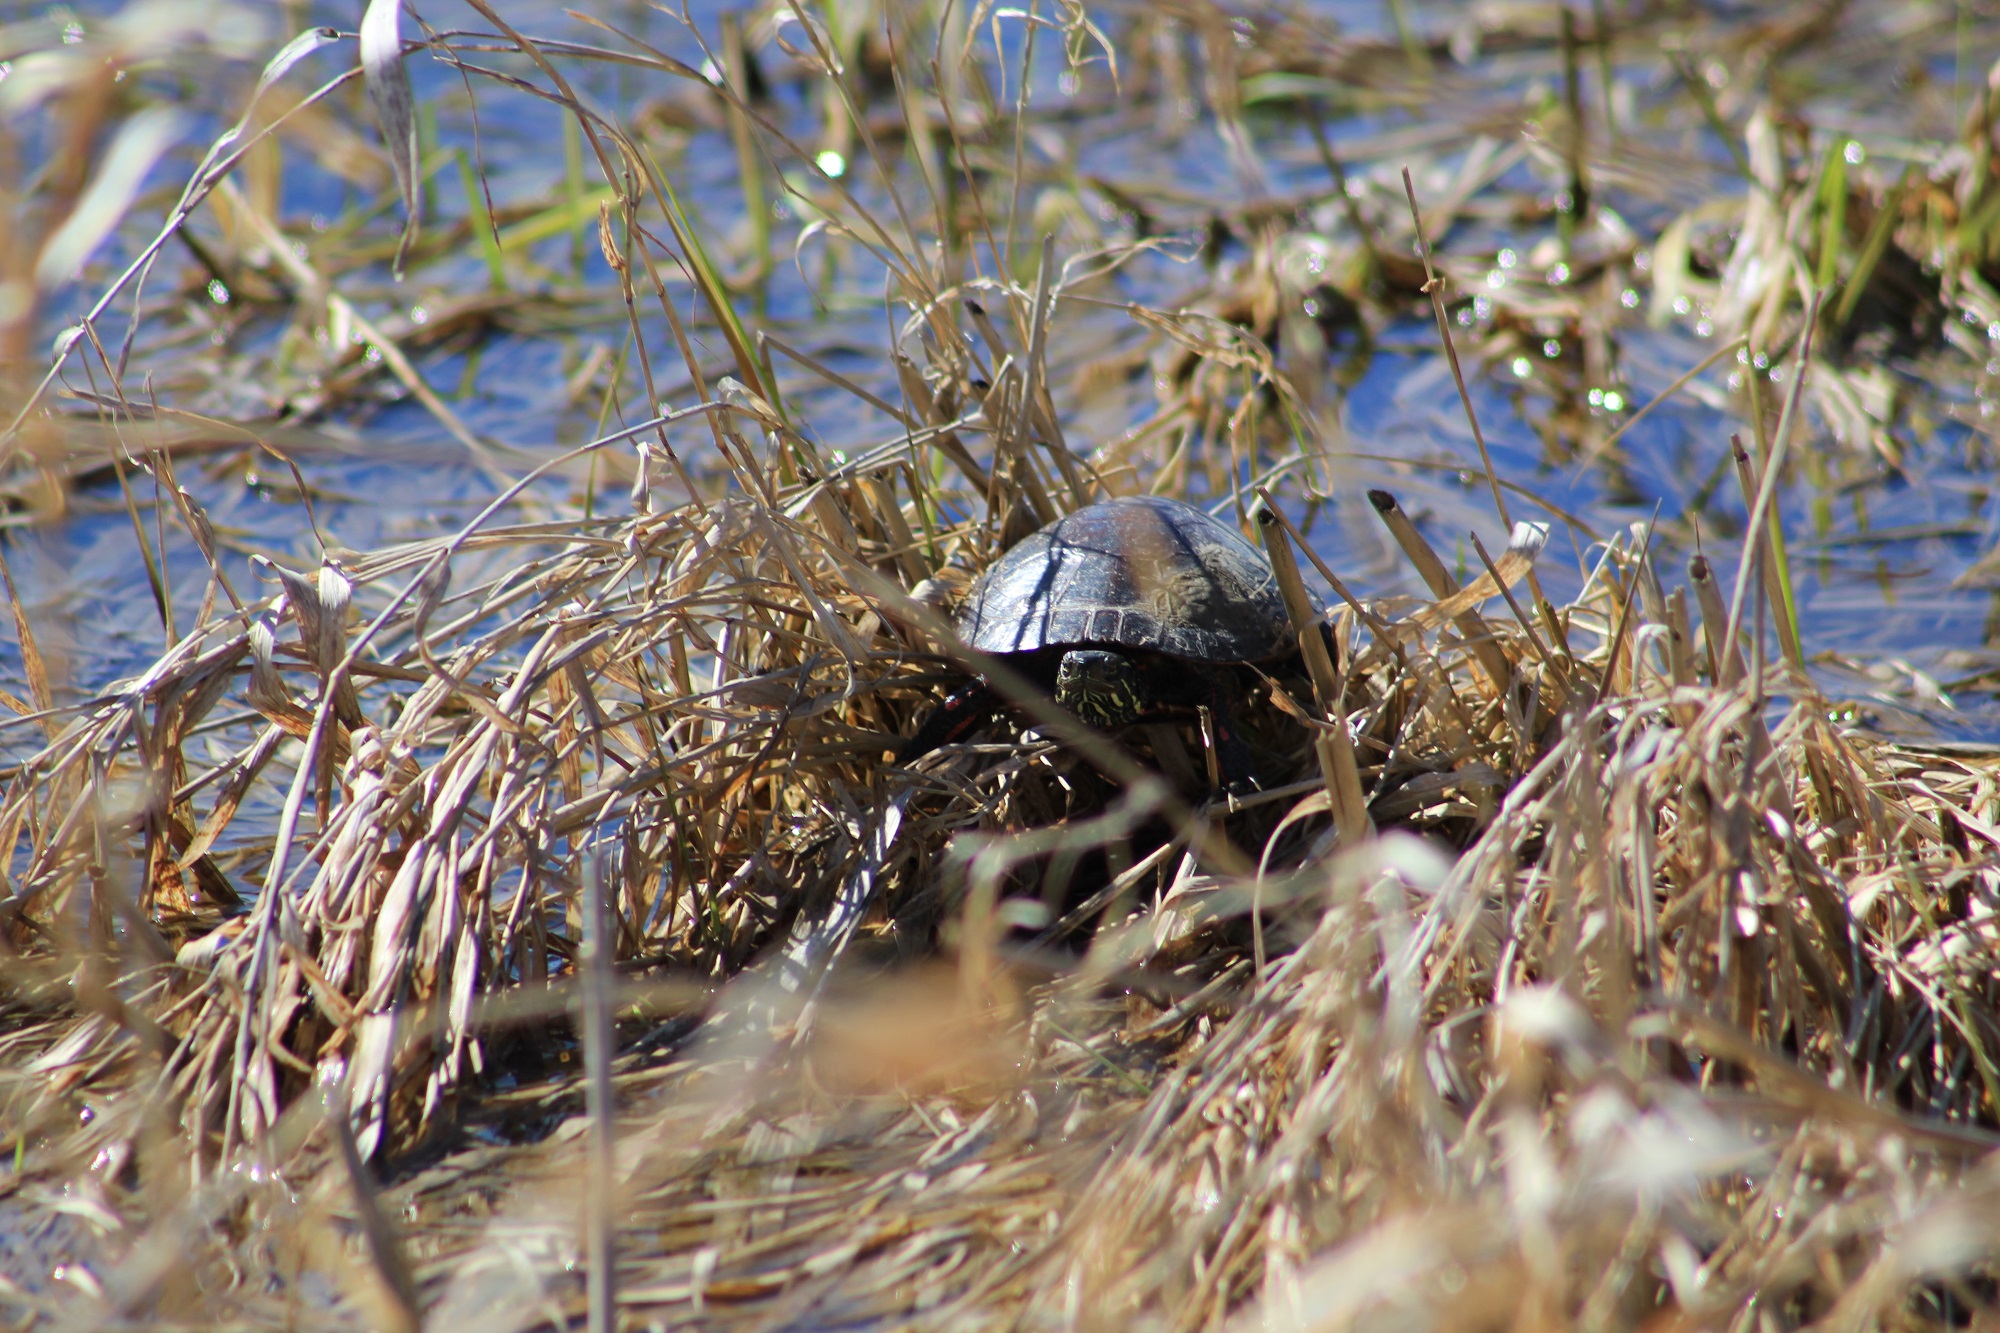 Painted turtle at Little Auglaize Wildlife Reserve